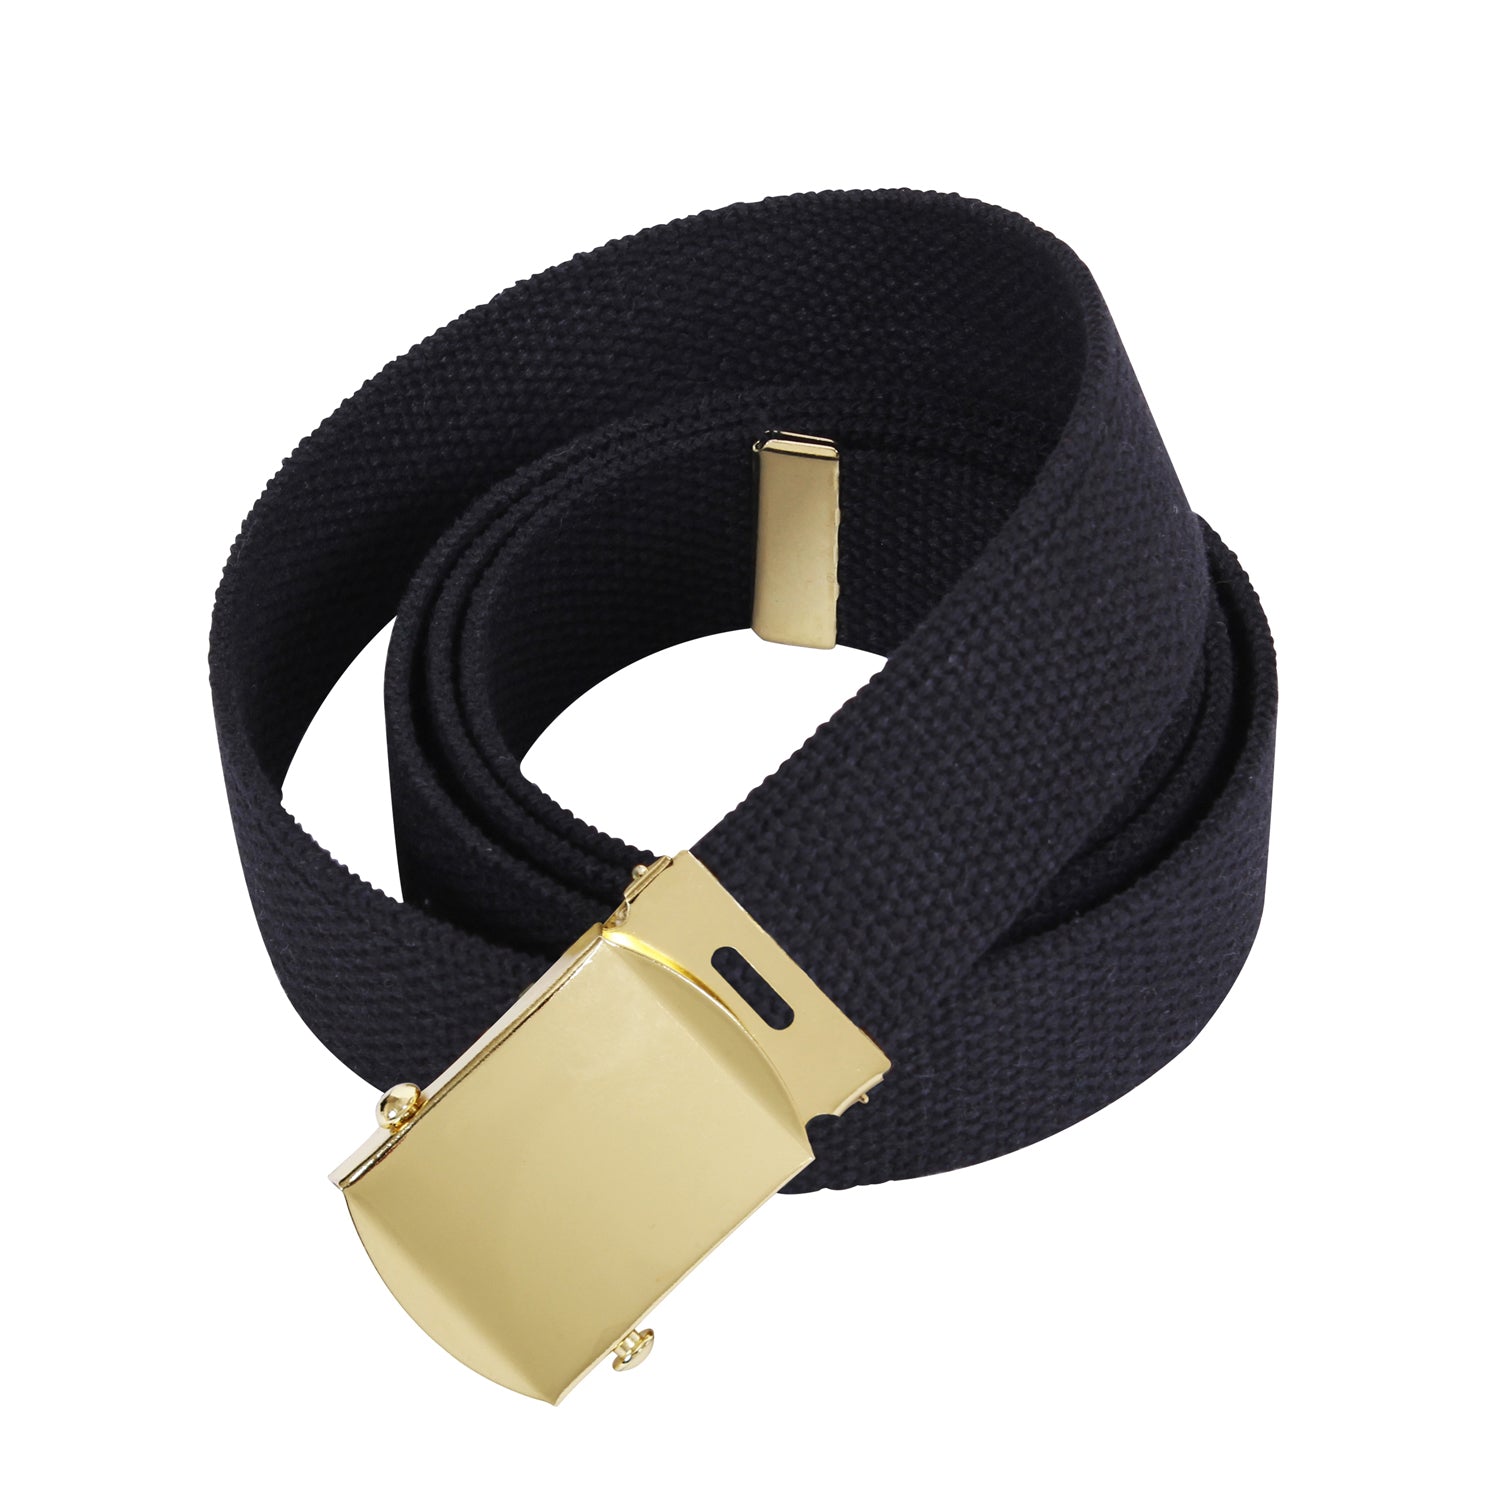 Rothco Web Belts - 54 Inches Long - Tactical Choice Plus